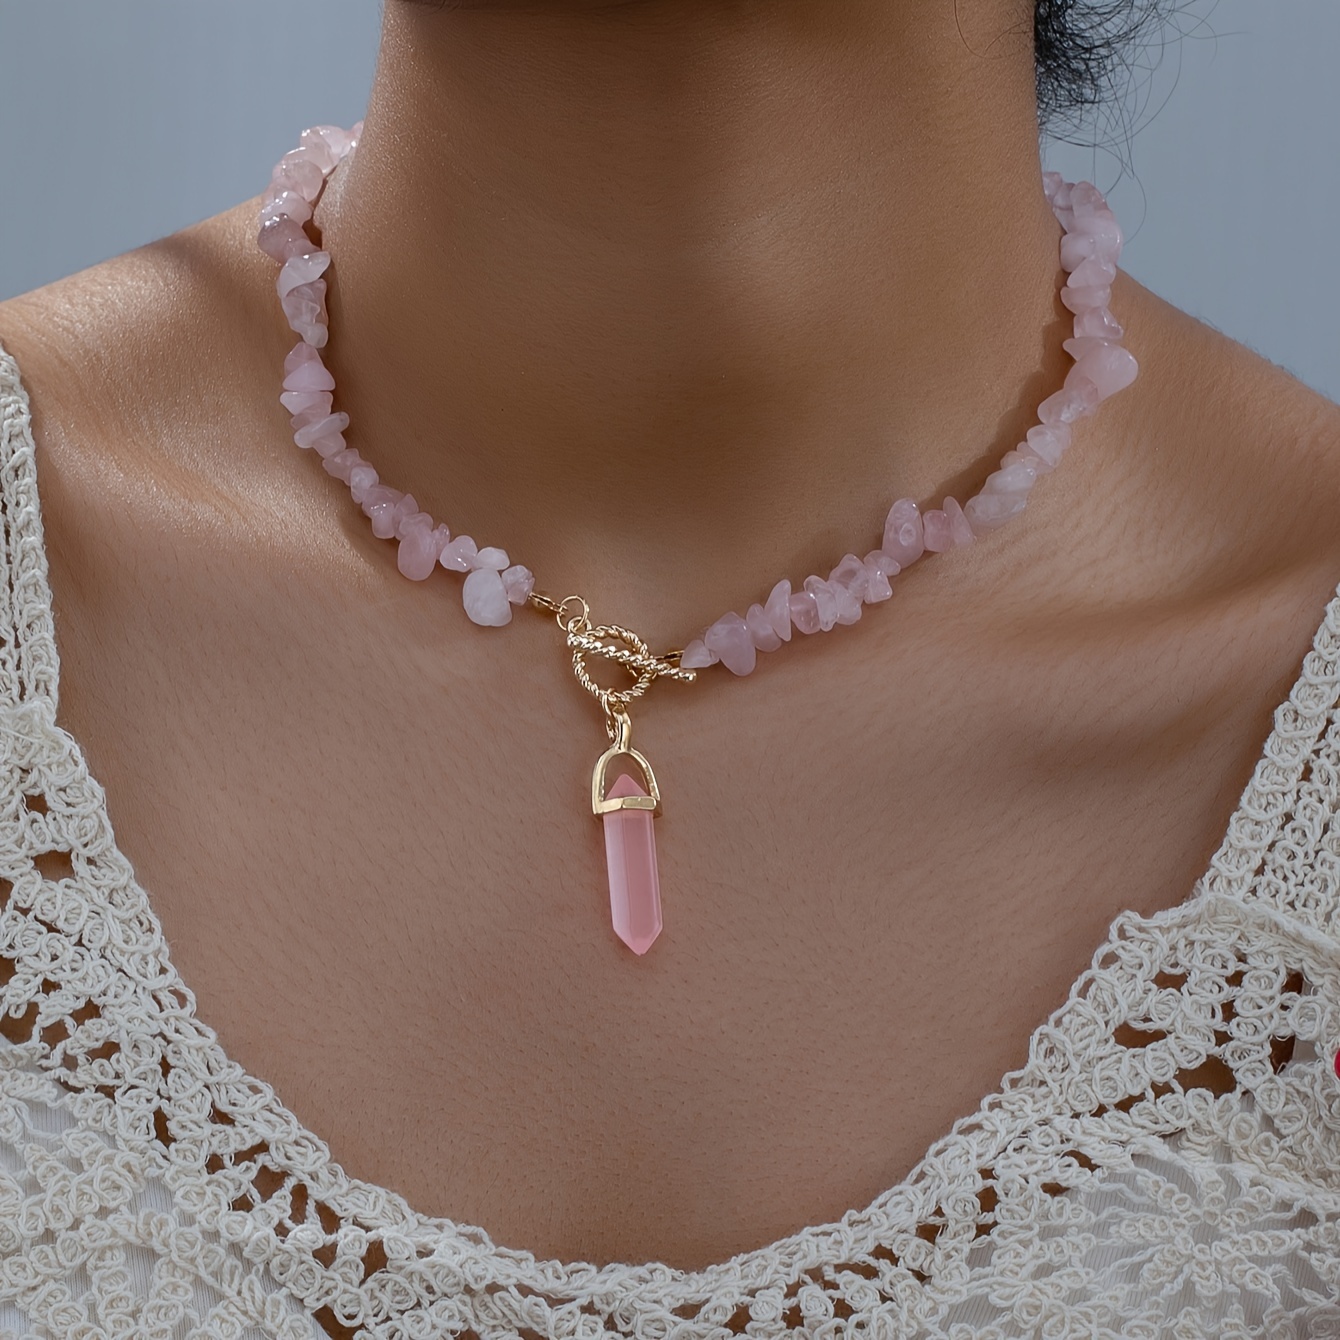 

1pc Elegant Pinkish Crystal Stone Pendant Necklace With Geometric Shape Pendant Design, Boho Chic Style, Women's Fashion Jewelry For Vacation And Casual Wear